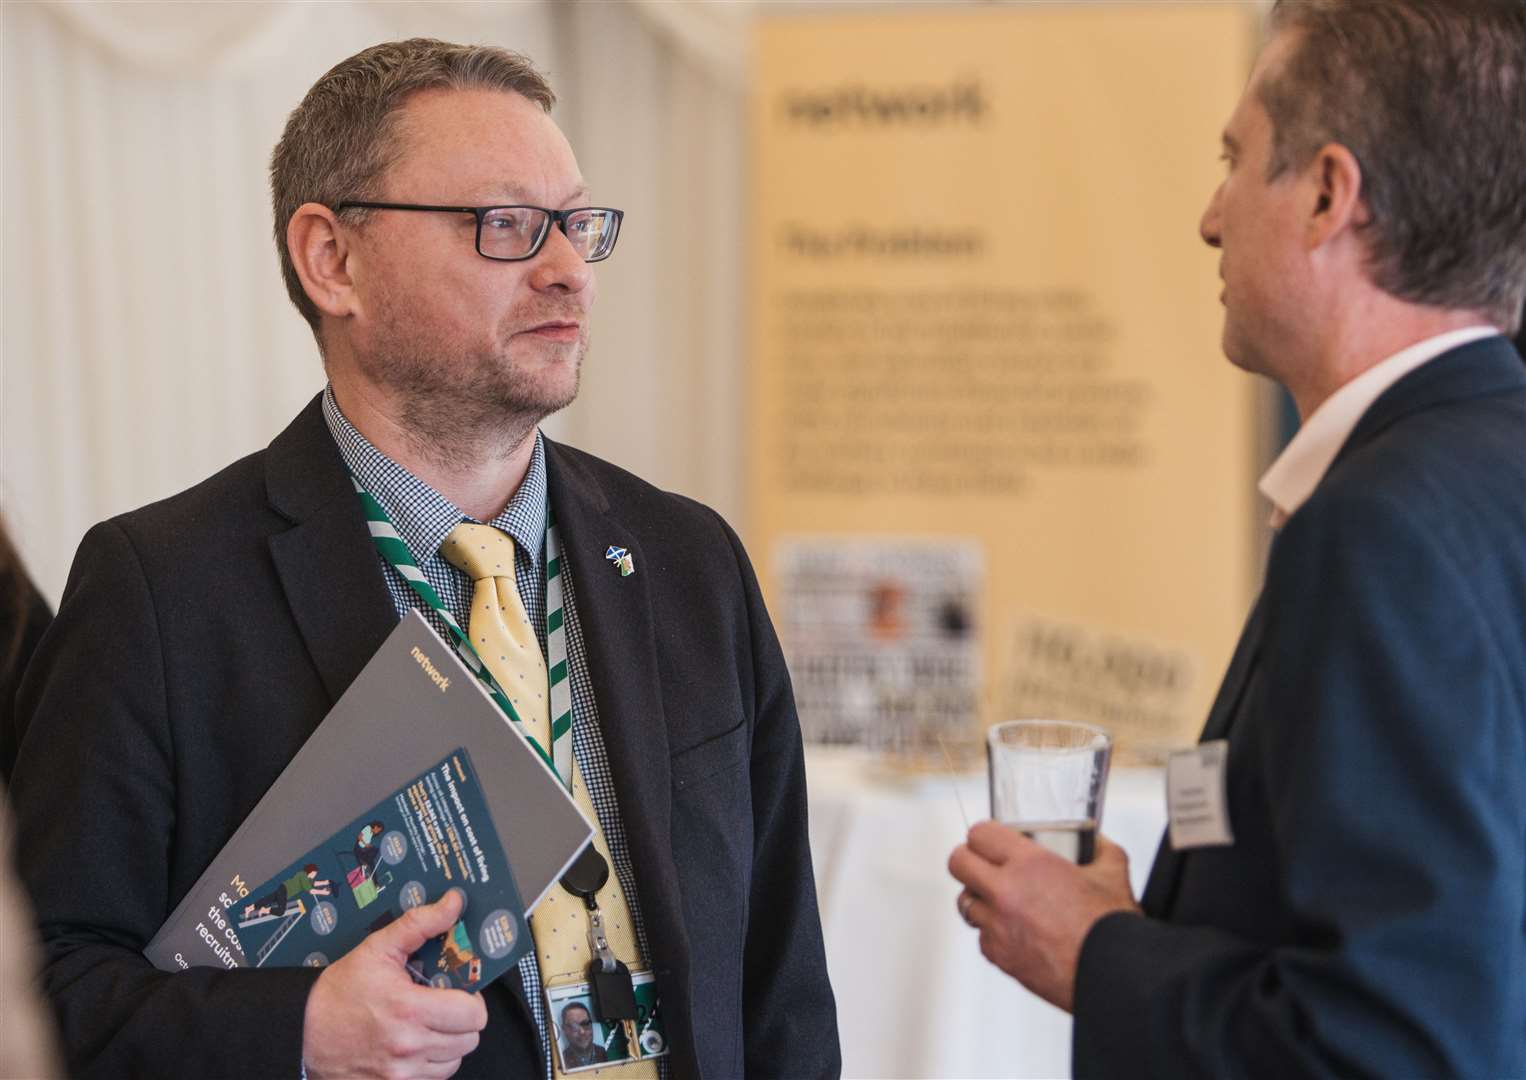 MP Richard Thomson pictured at the Network event in Parliament